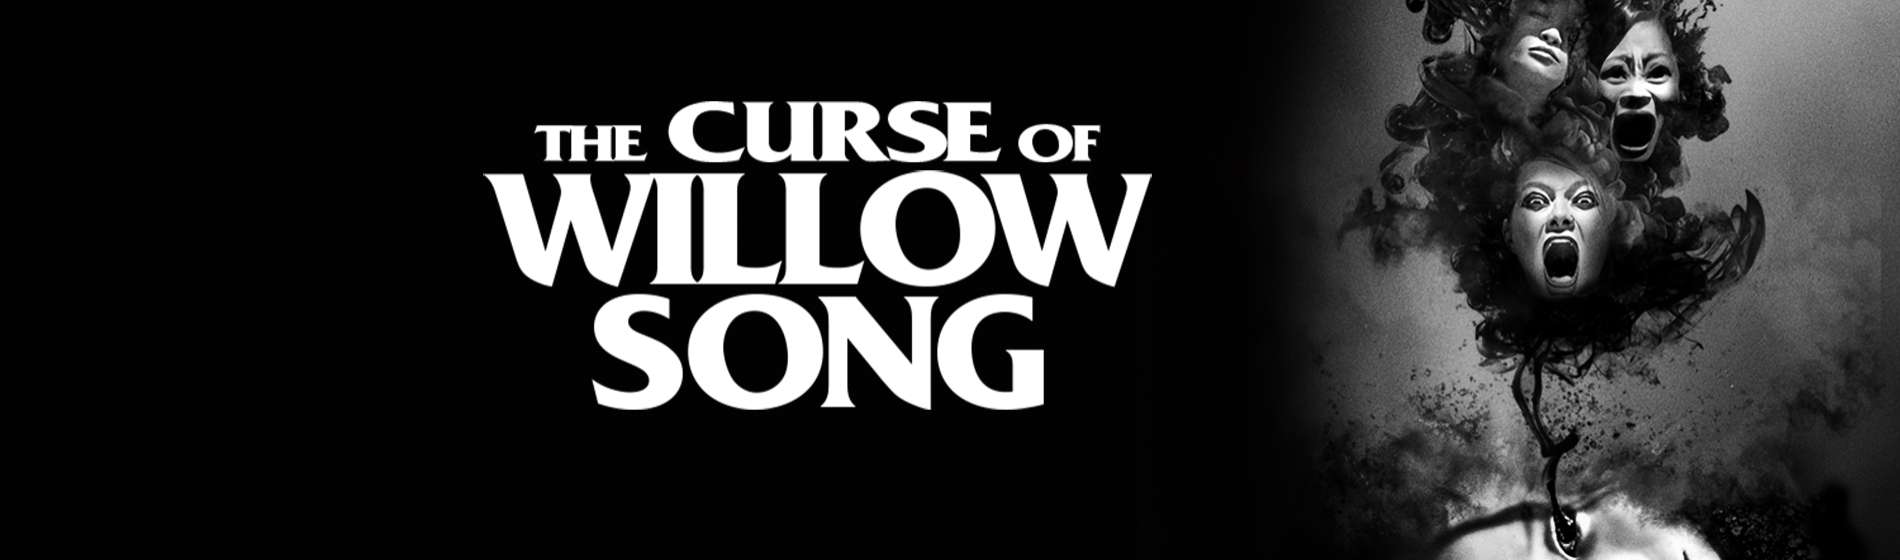 The Curse of Willow Song Featured